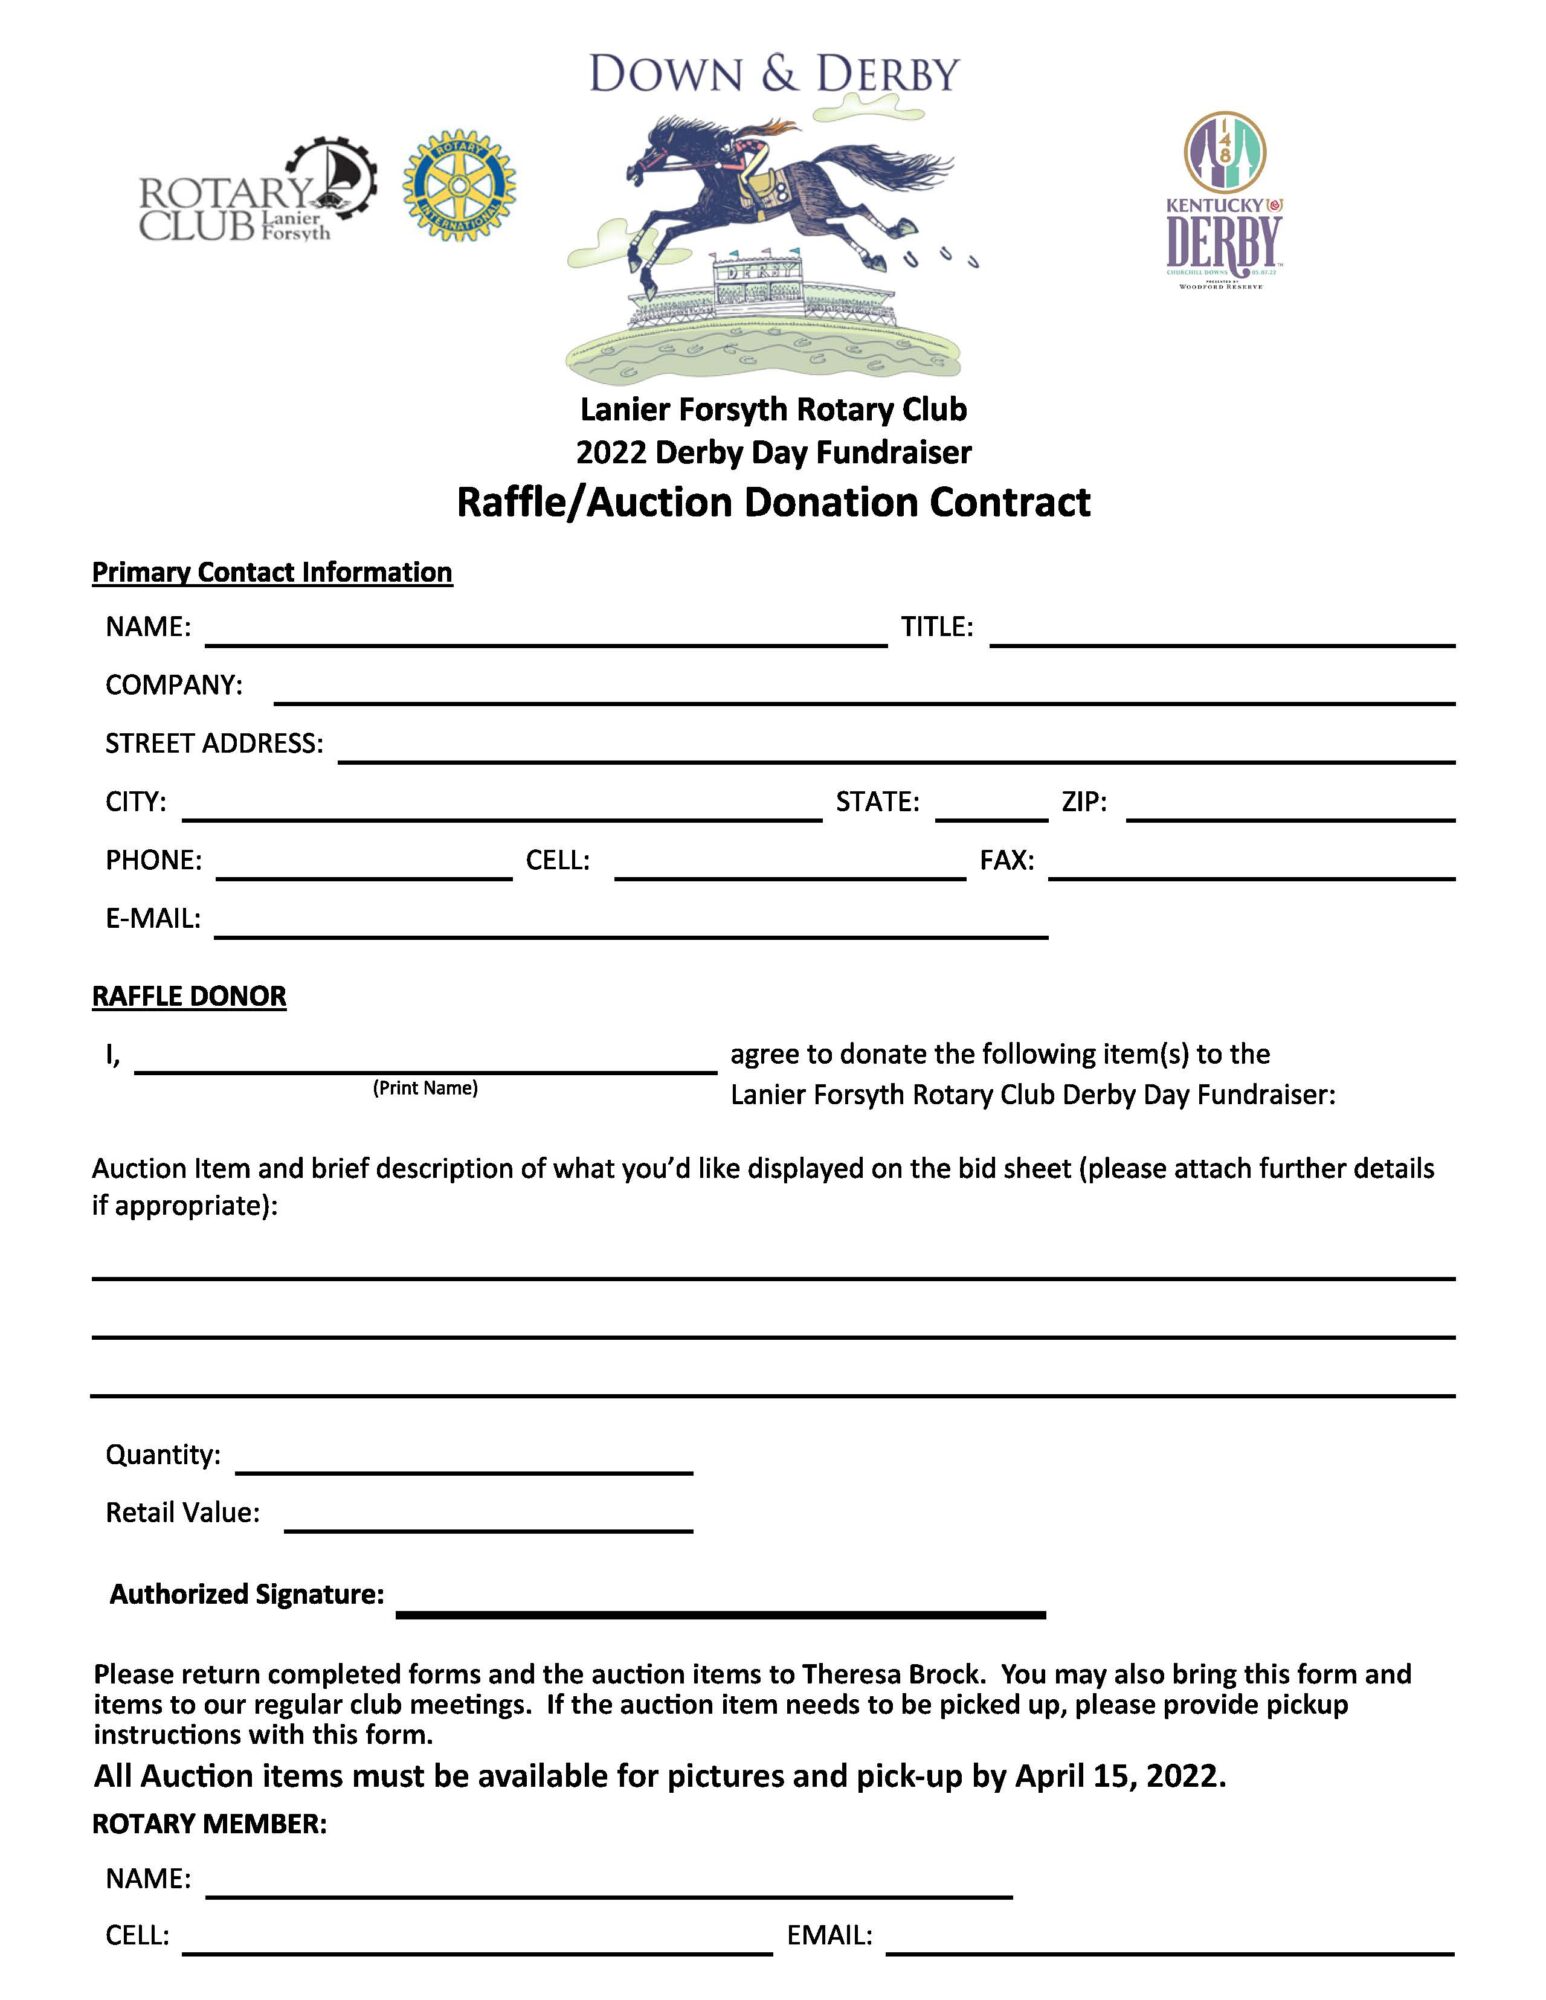 2022 Derby Auction Form